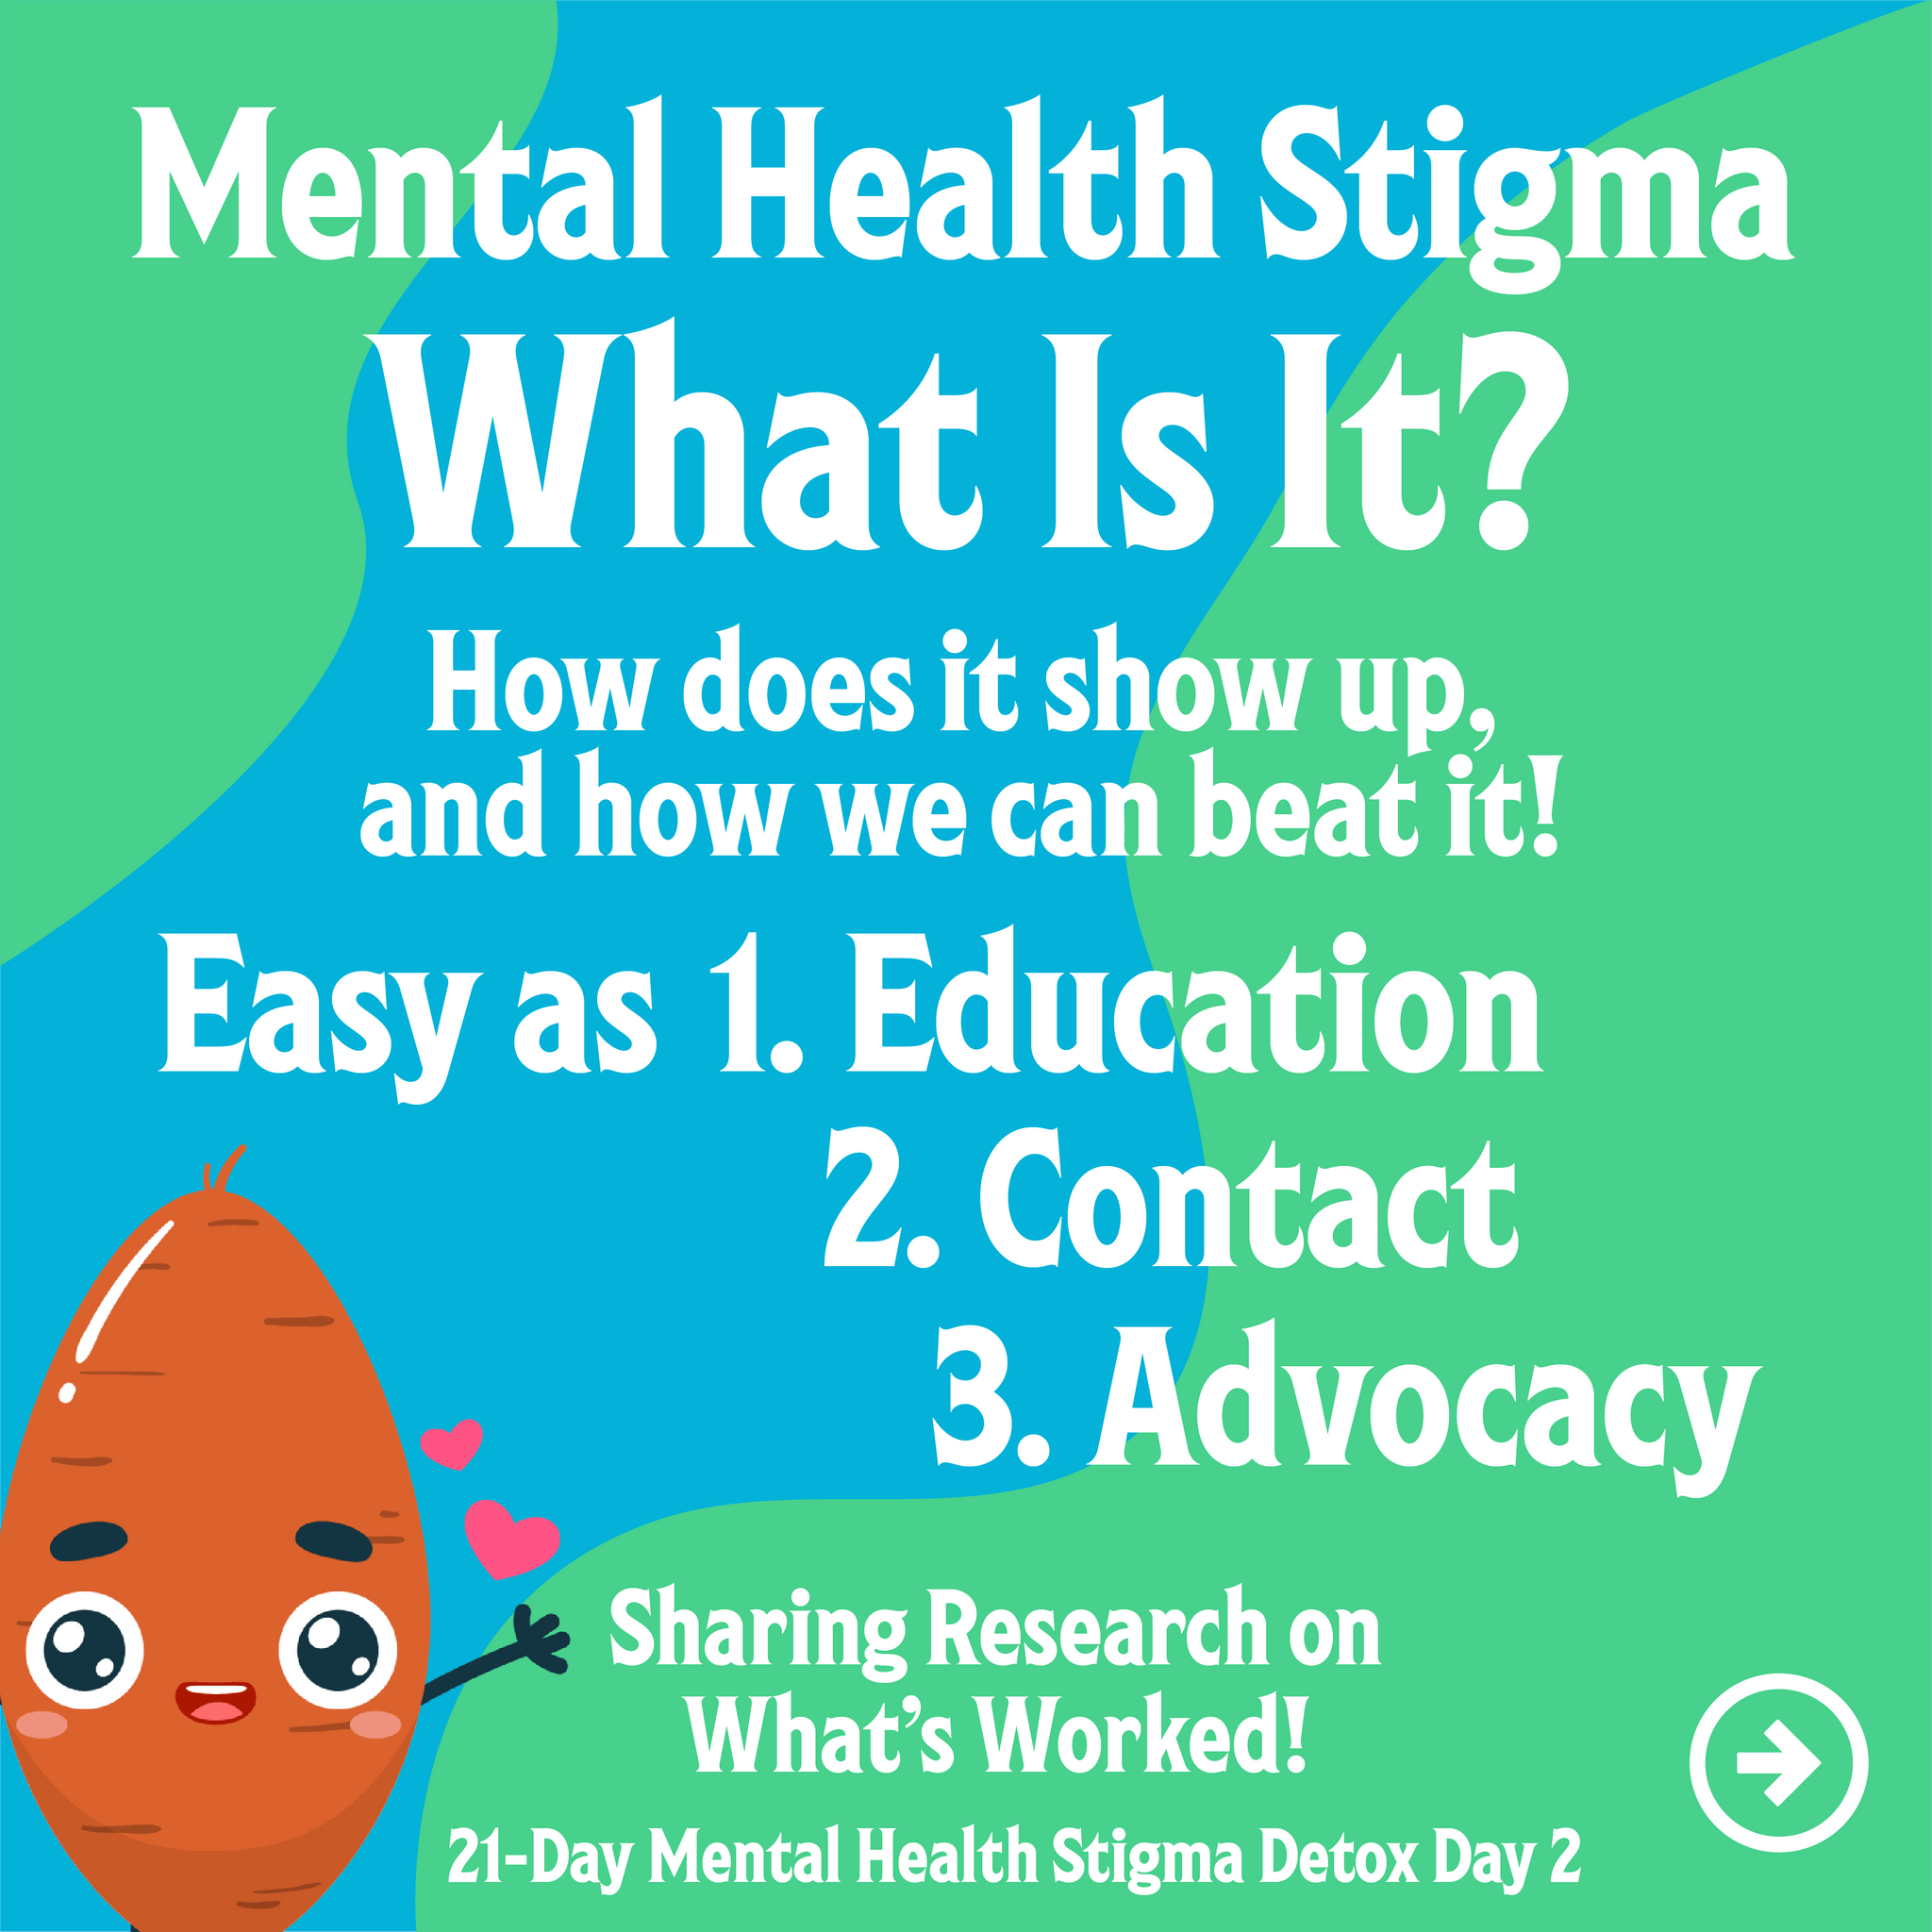 Mental Health Stigma: What is It? How does it show up, and how we can beat it! 21-Day Mental Health Stigma Detox Day 2